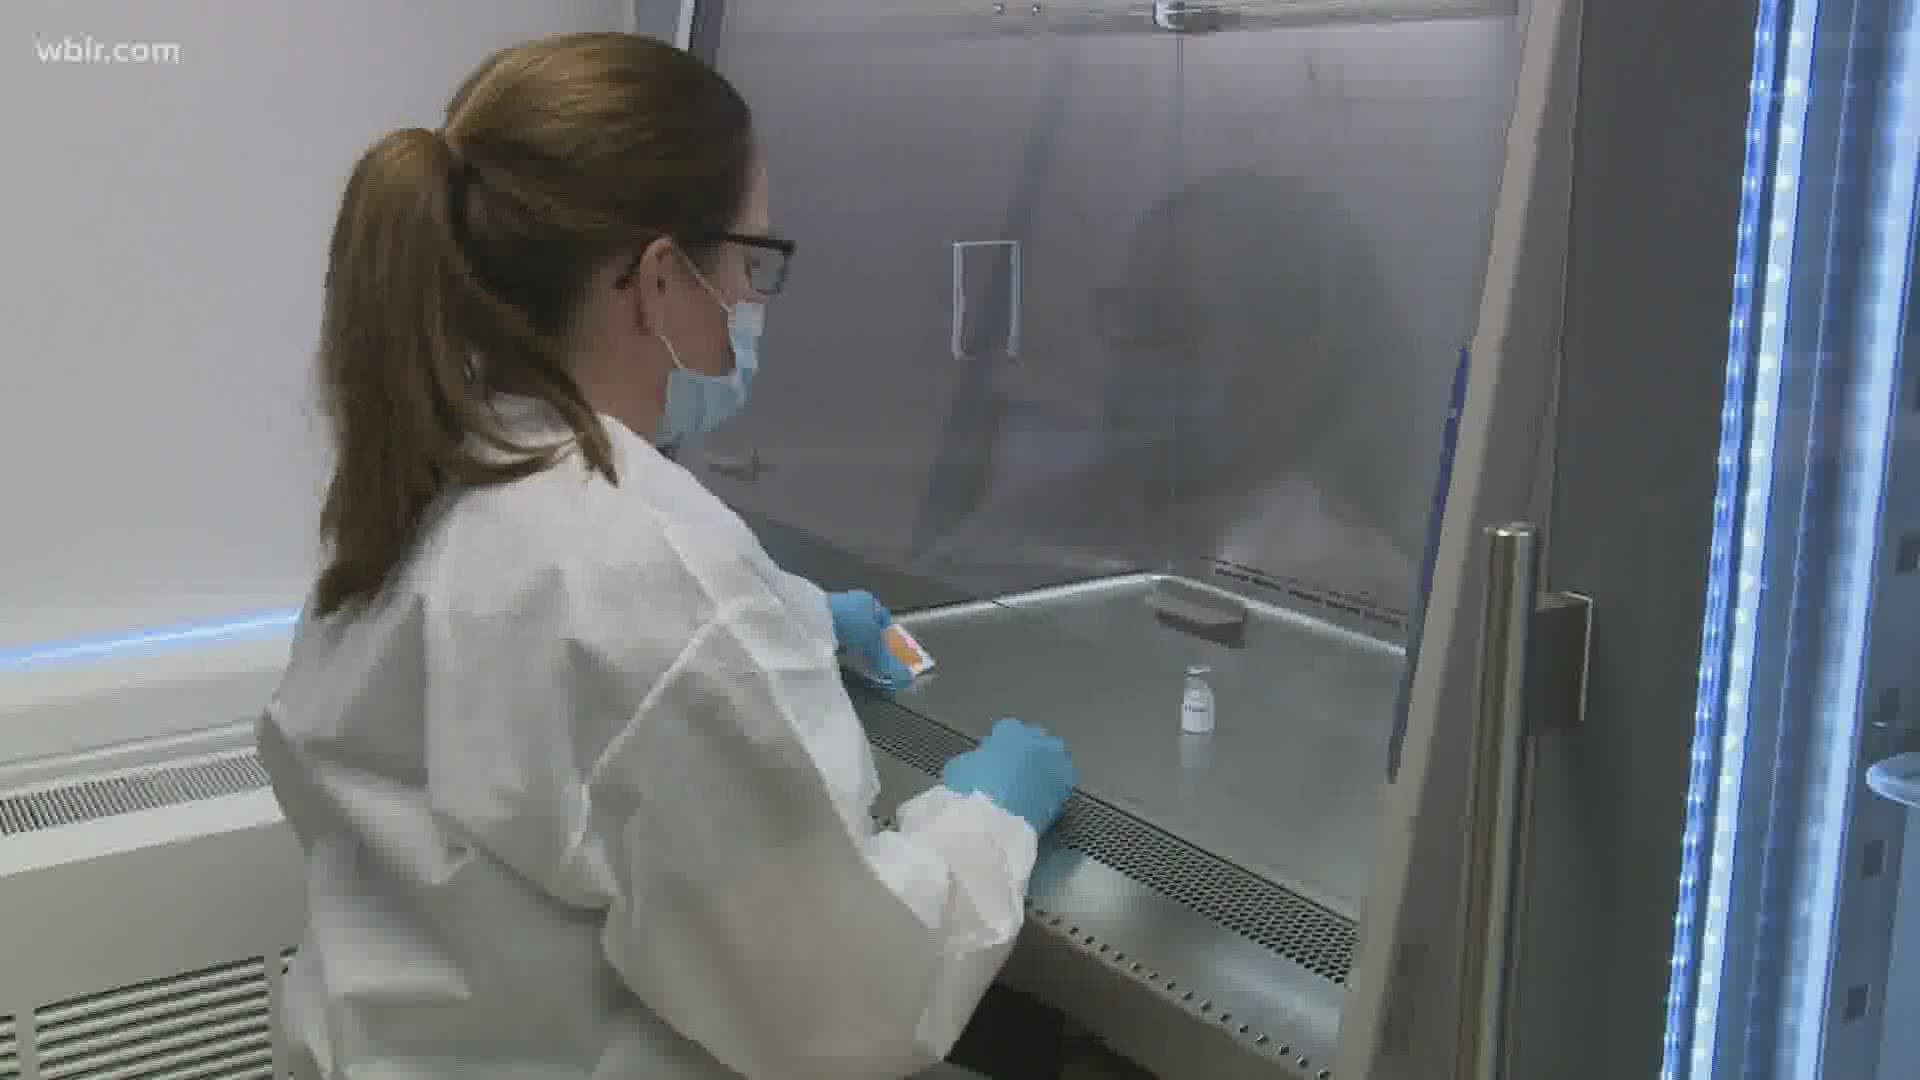 Human testing is underway in Knoxville on an experimental vaccine that is showing promise in the fight against the coronavirus.